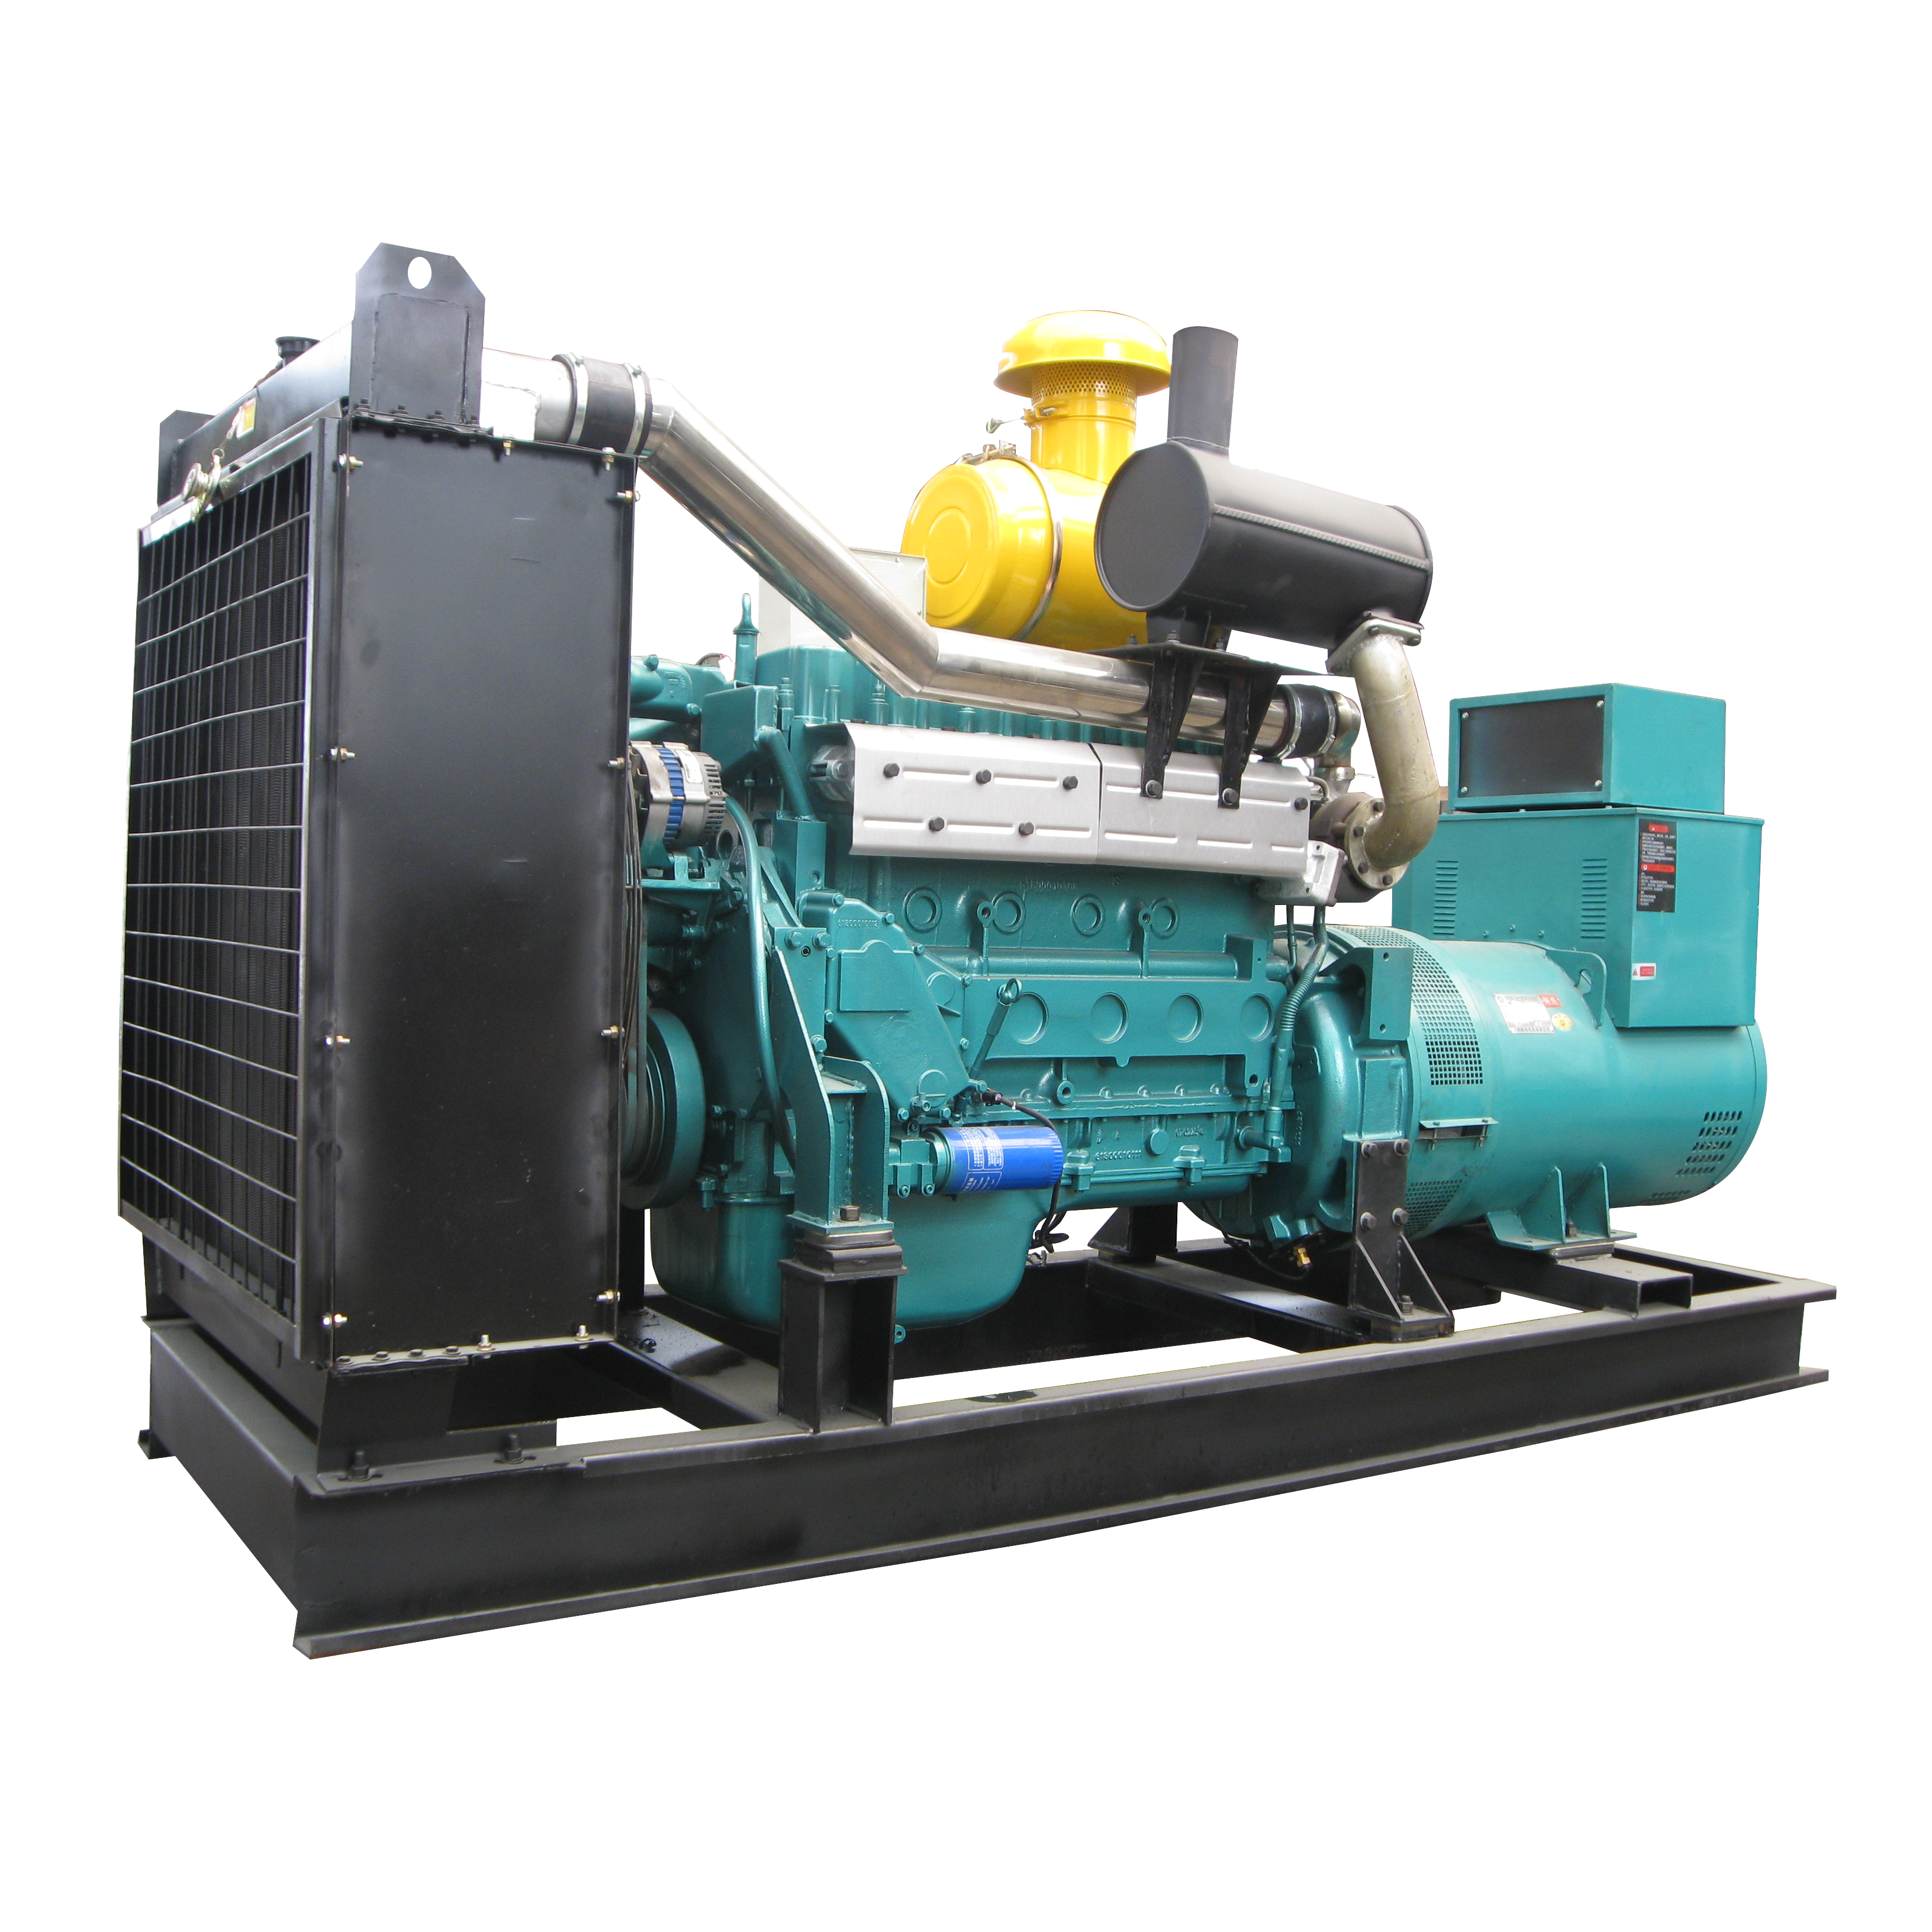 300KW <a href='/diesel-generator-set/'>Diesel Generator Set</a> | Top-rated Technical Specs | Factory Direct Prices